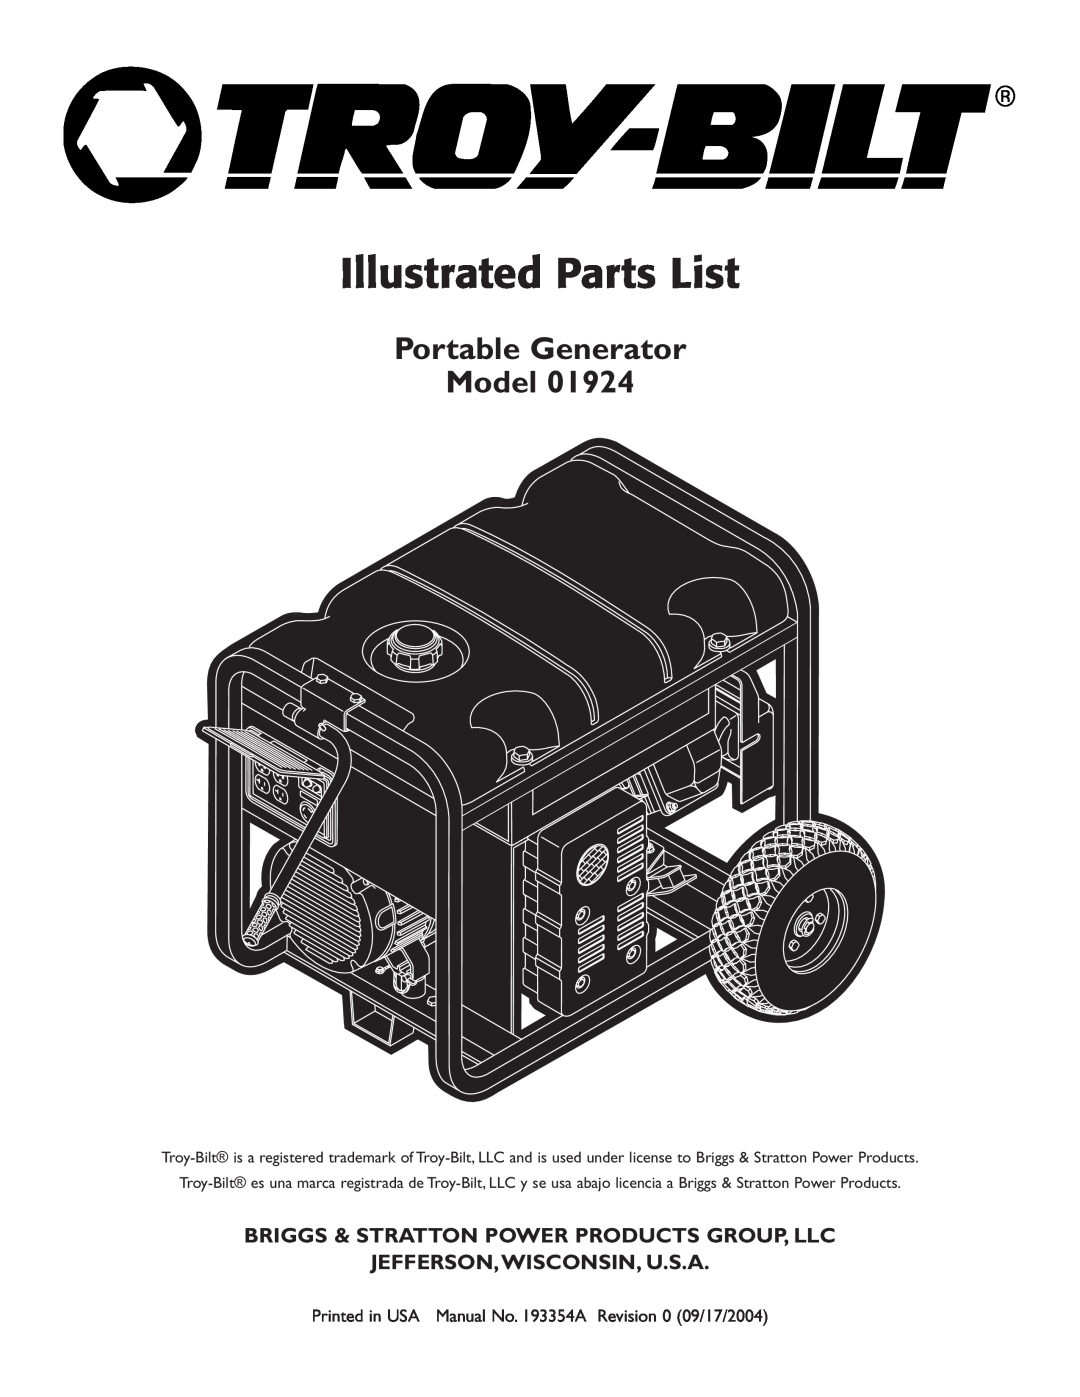 Troy-Bilt 1924 manual Portable Generator Model, Illustrated Parts List, Briggs & Stratton Power Products Group, Llc 